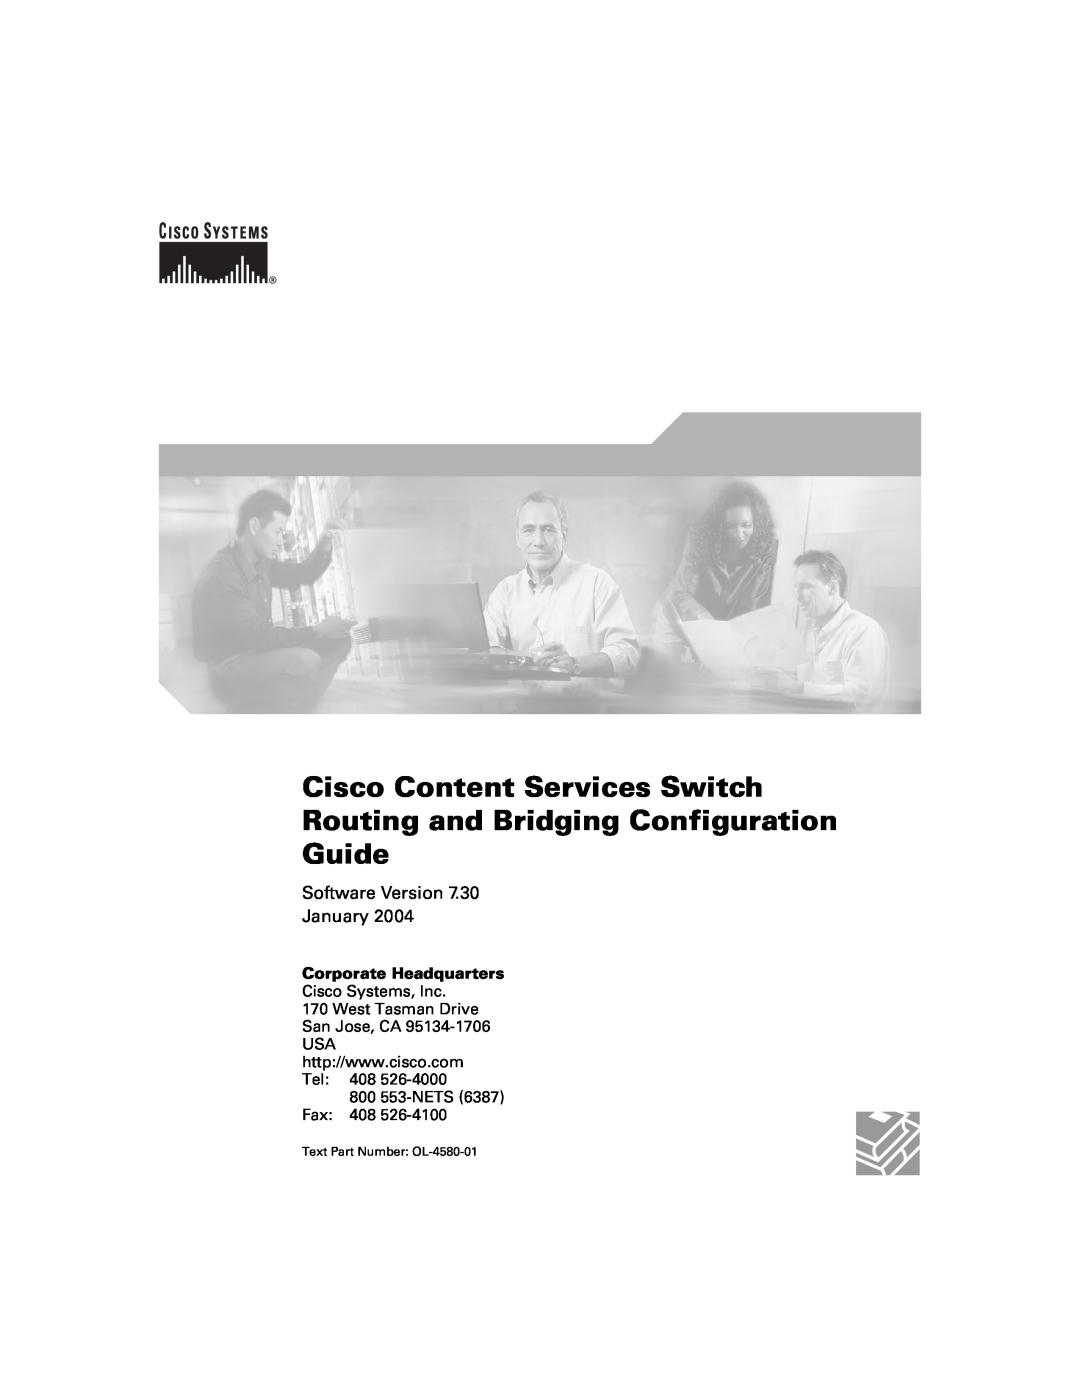 Cisco Systems OL-4580-01 manual Cisco Content Services Switch Routing and Bridging Configuration, Guide 